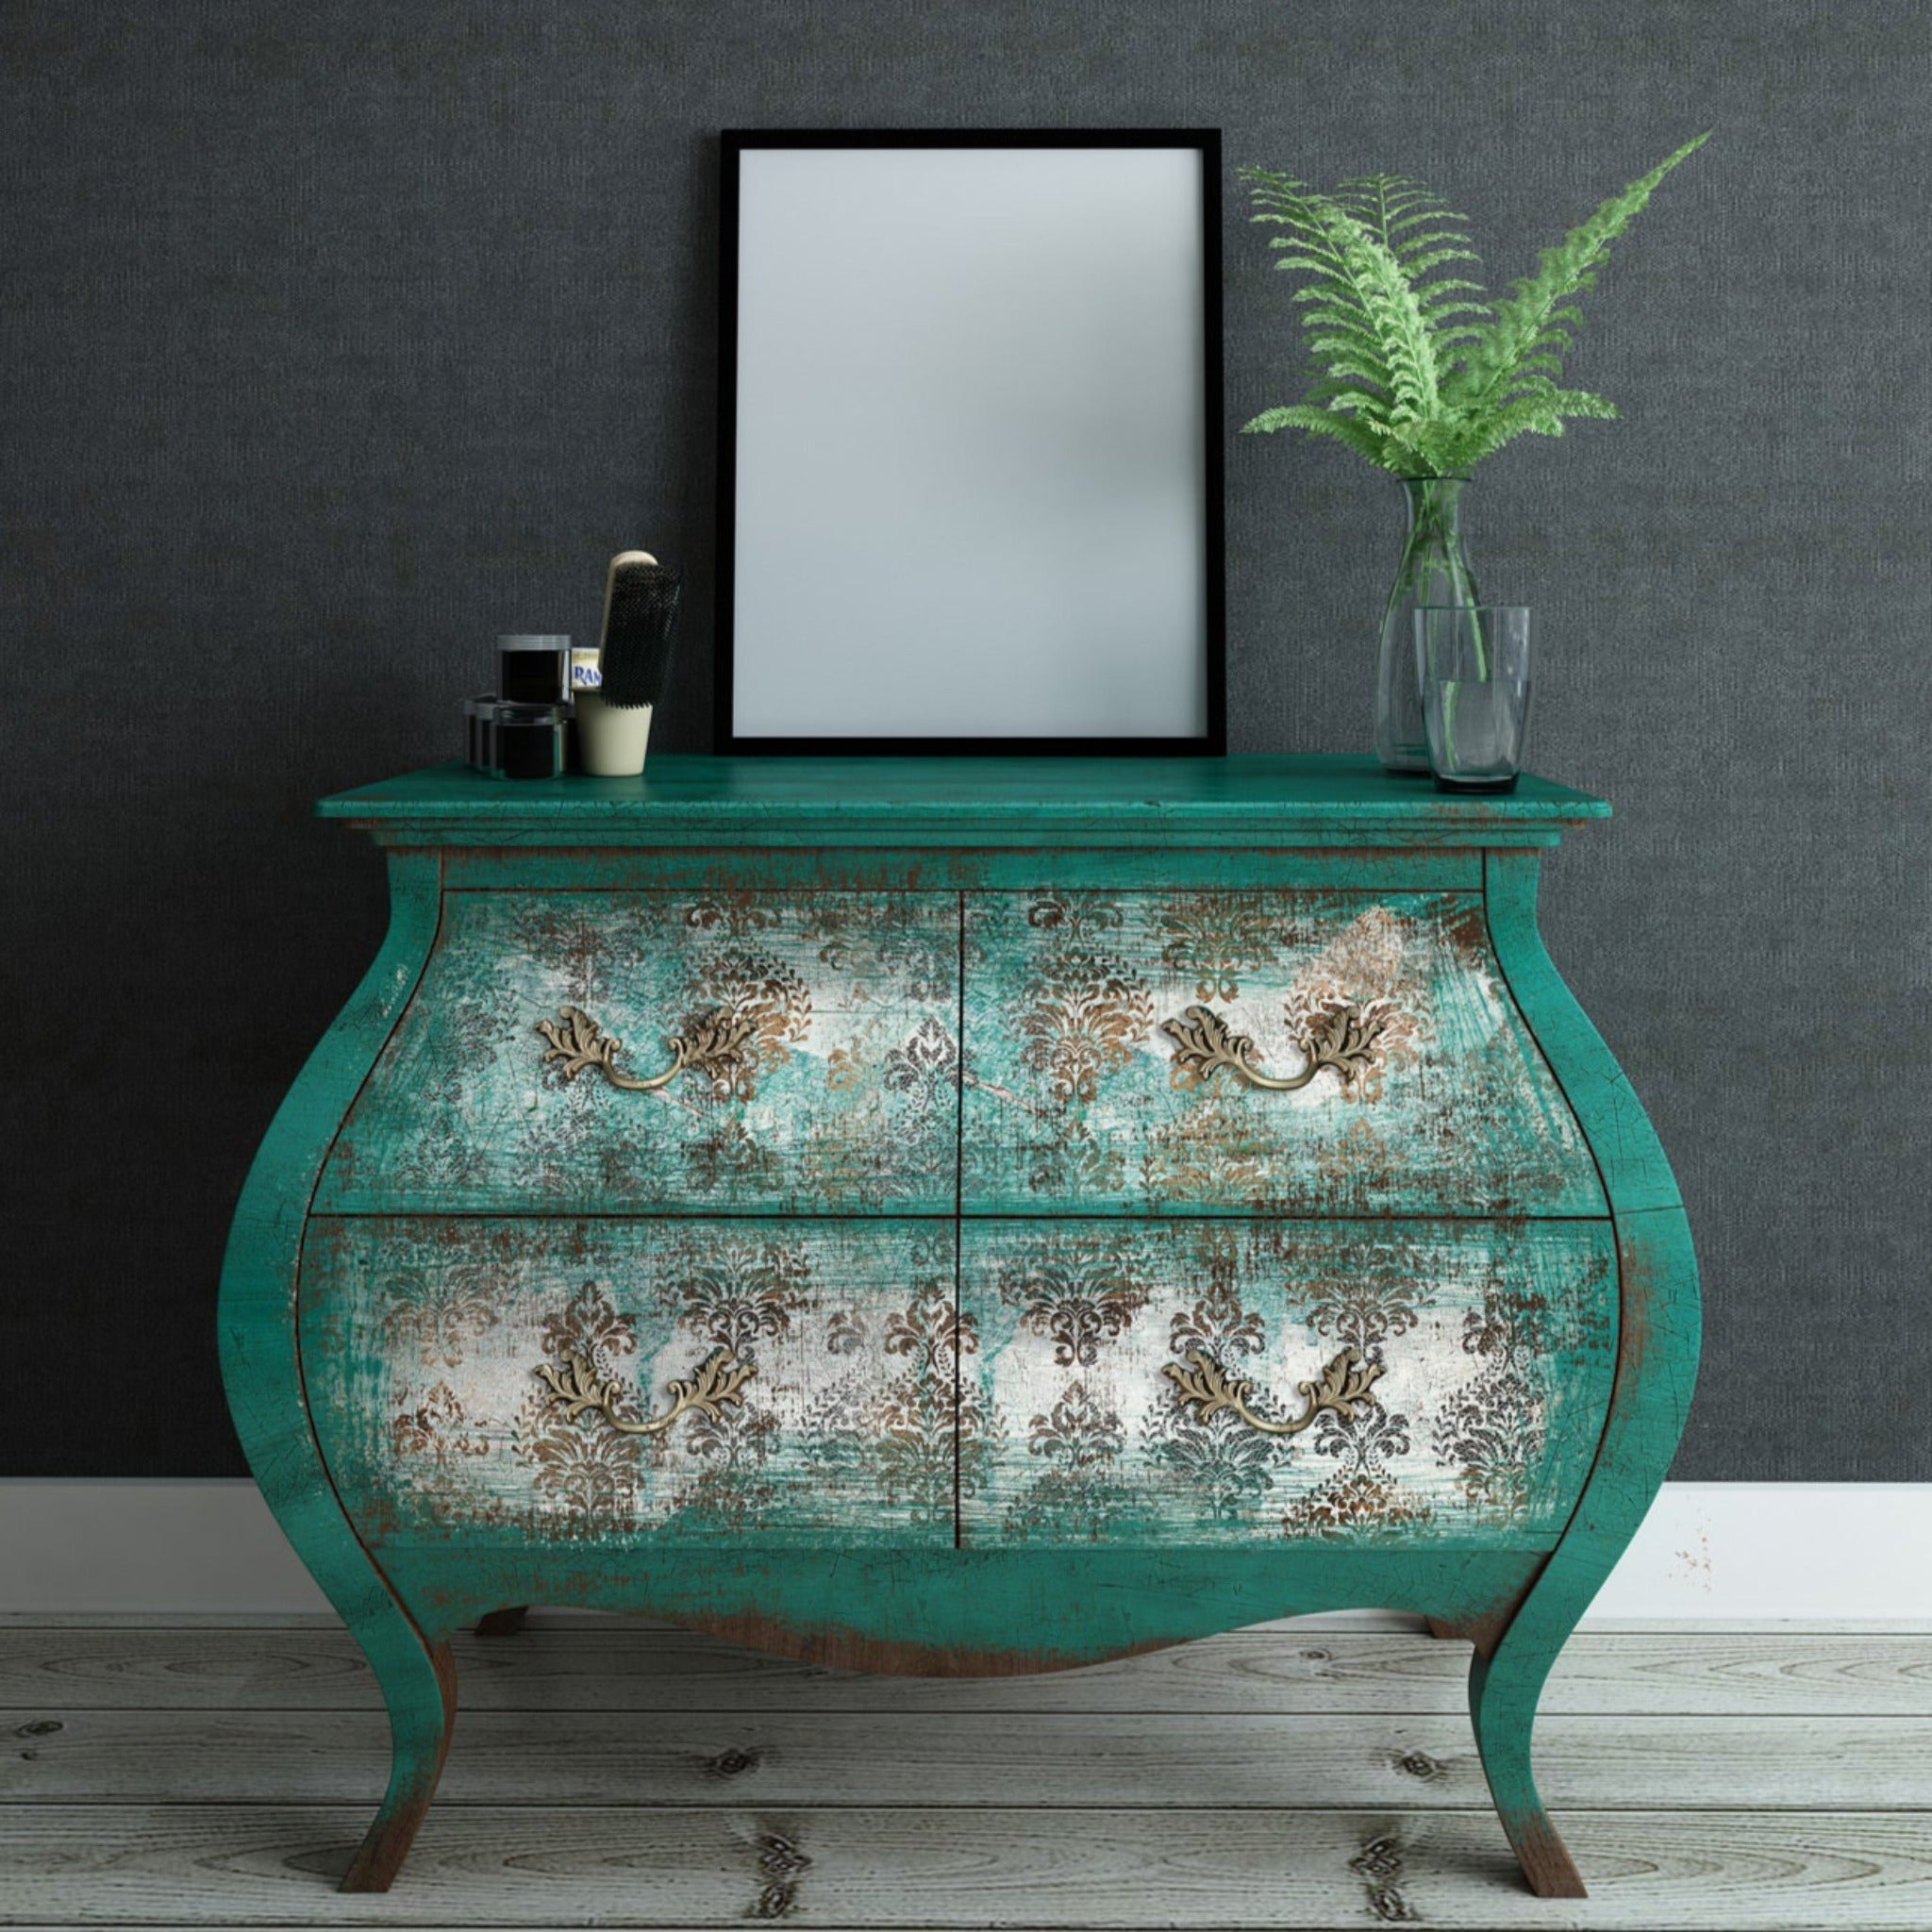 A vintage Bombay style dresser is painted distressed teal green and features ReDesign with Prima's Patina Flourish tissue paper on its 4 drawers.